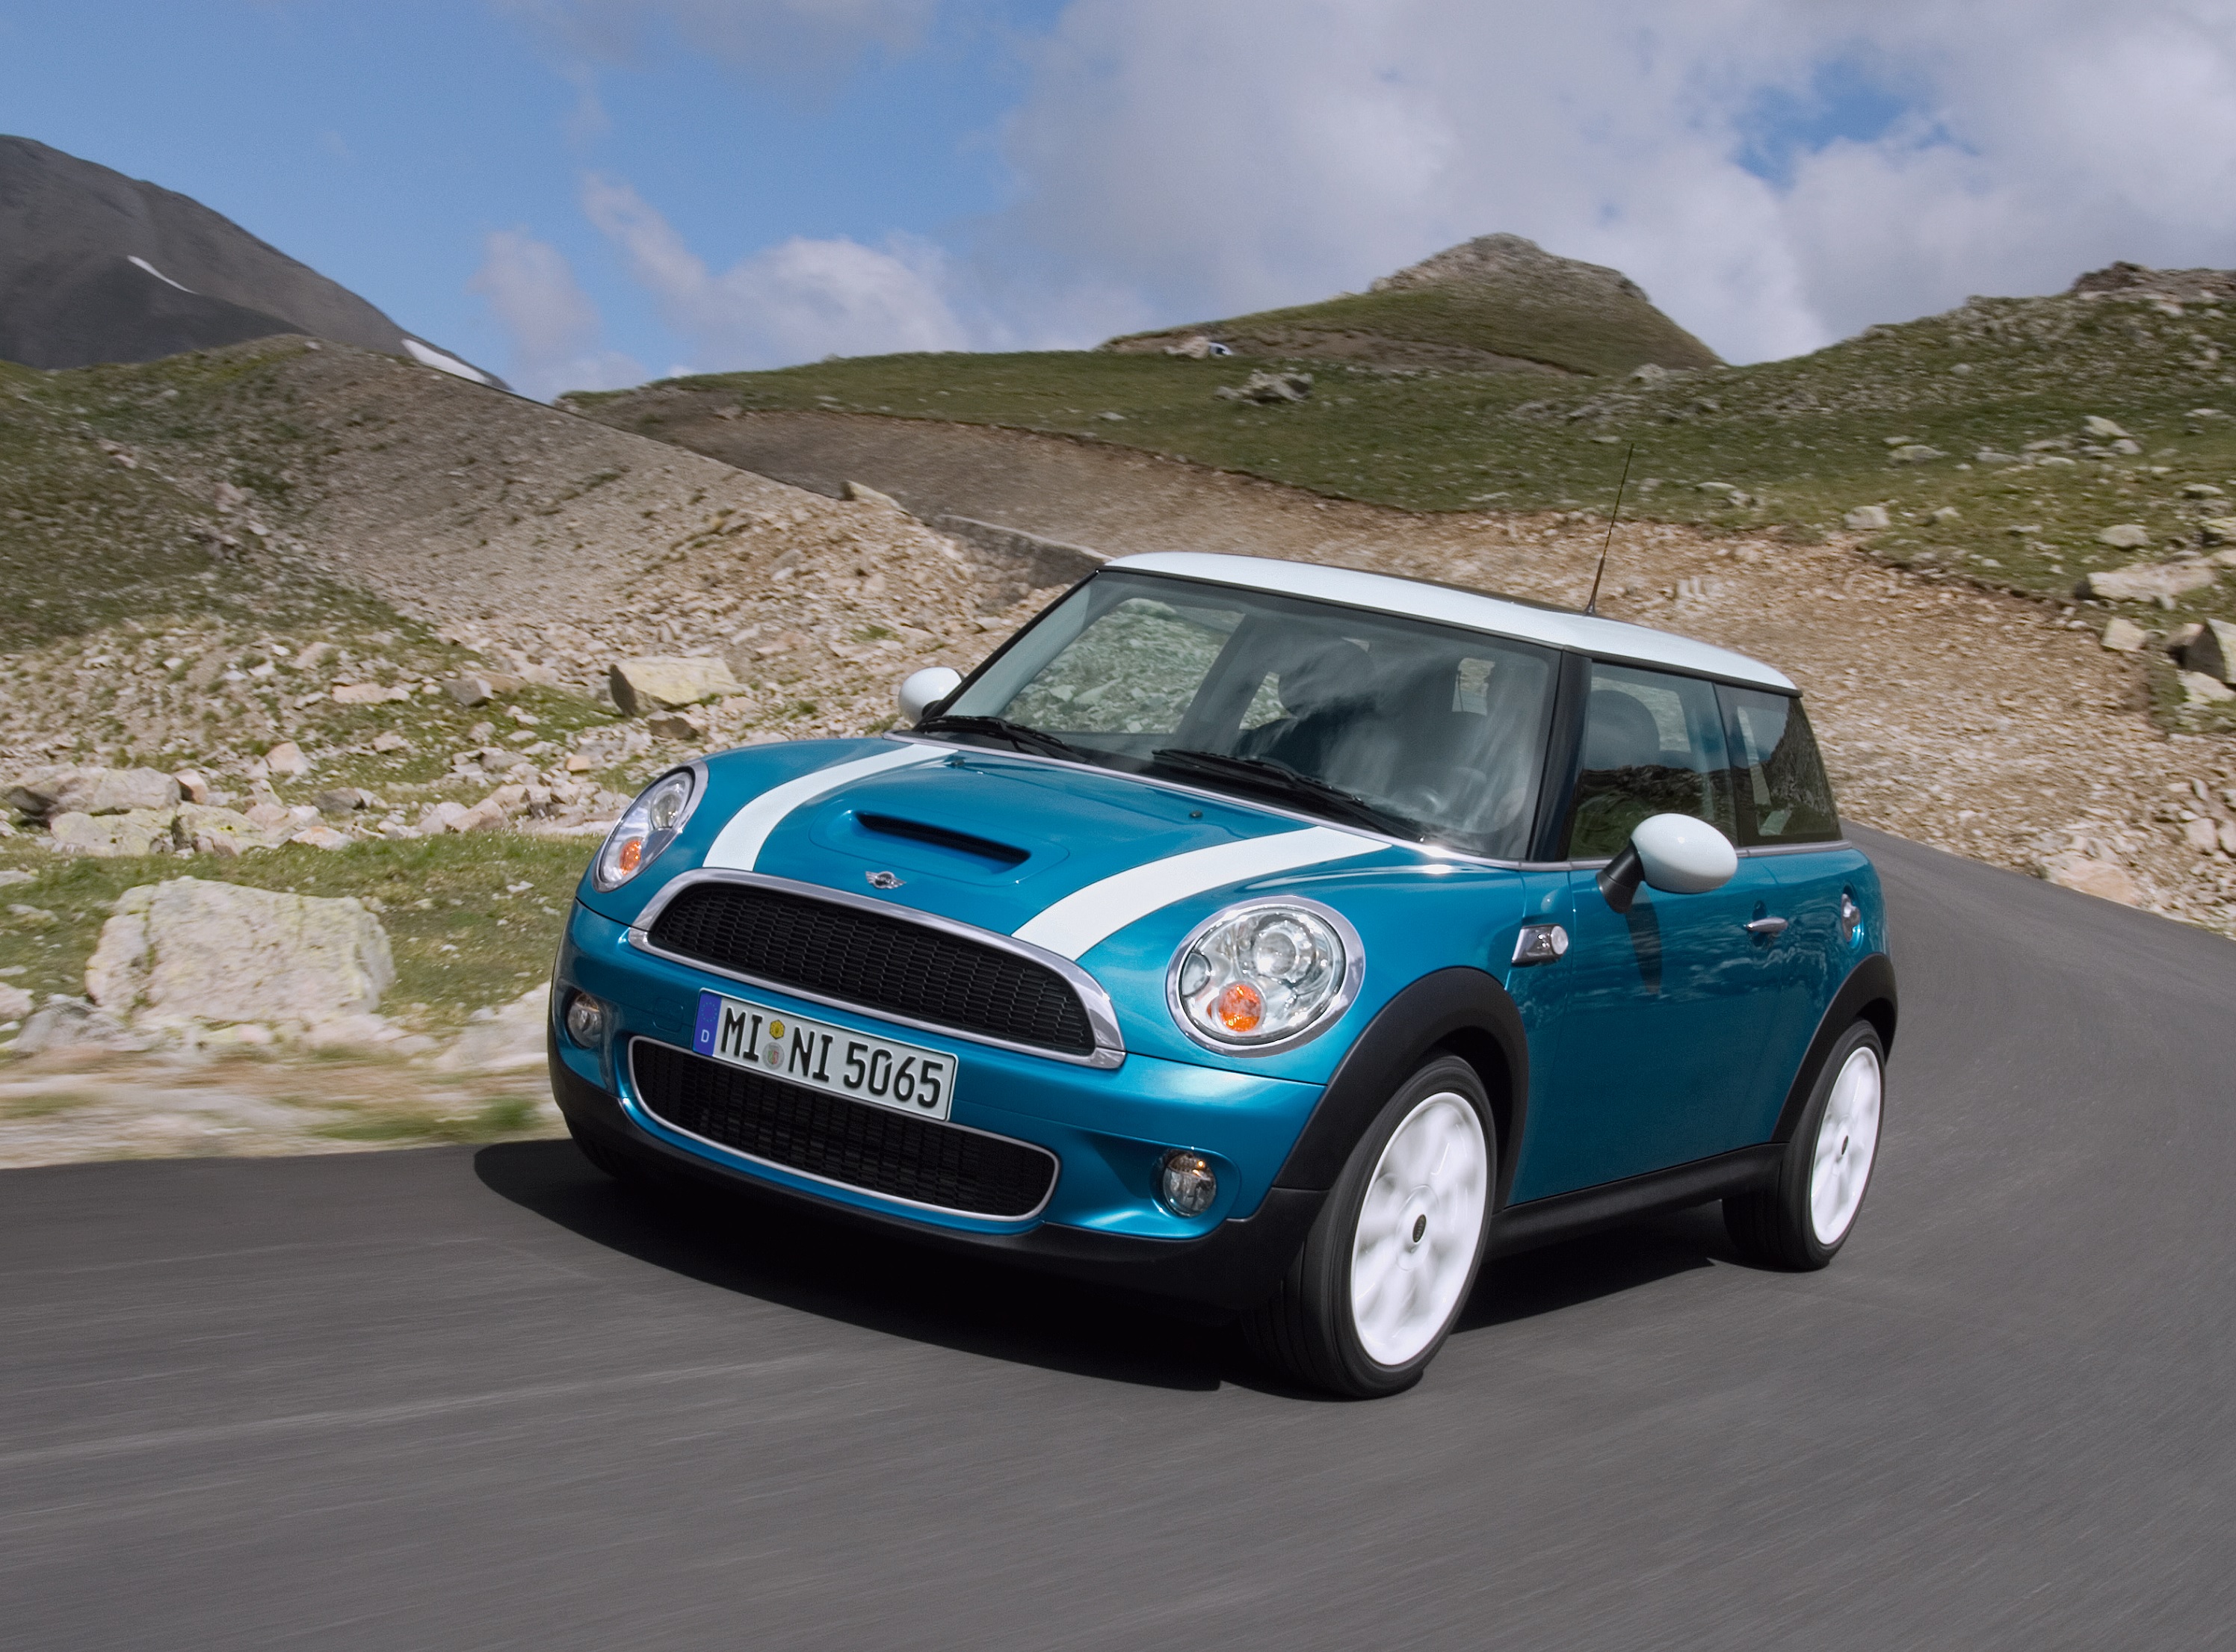 A teal 2007 R56 Mini Cooper S driving around a mountain road